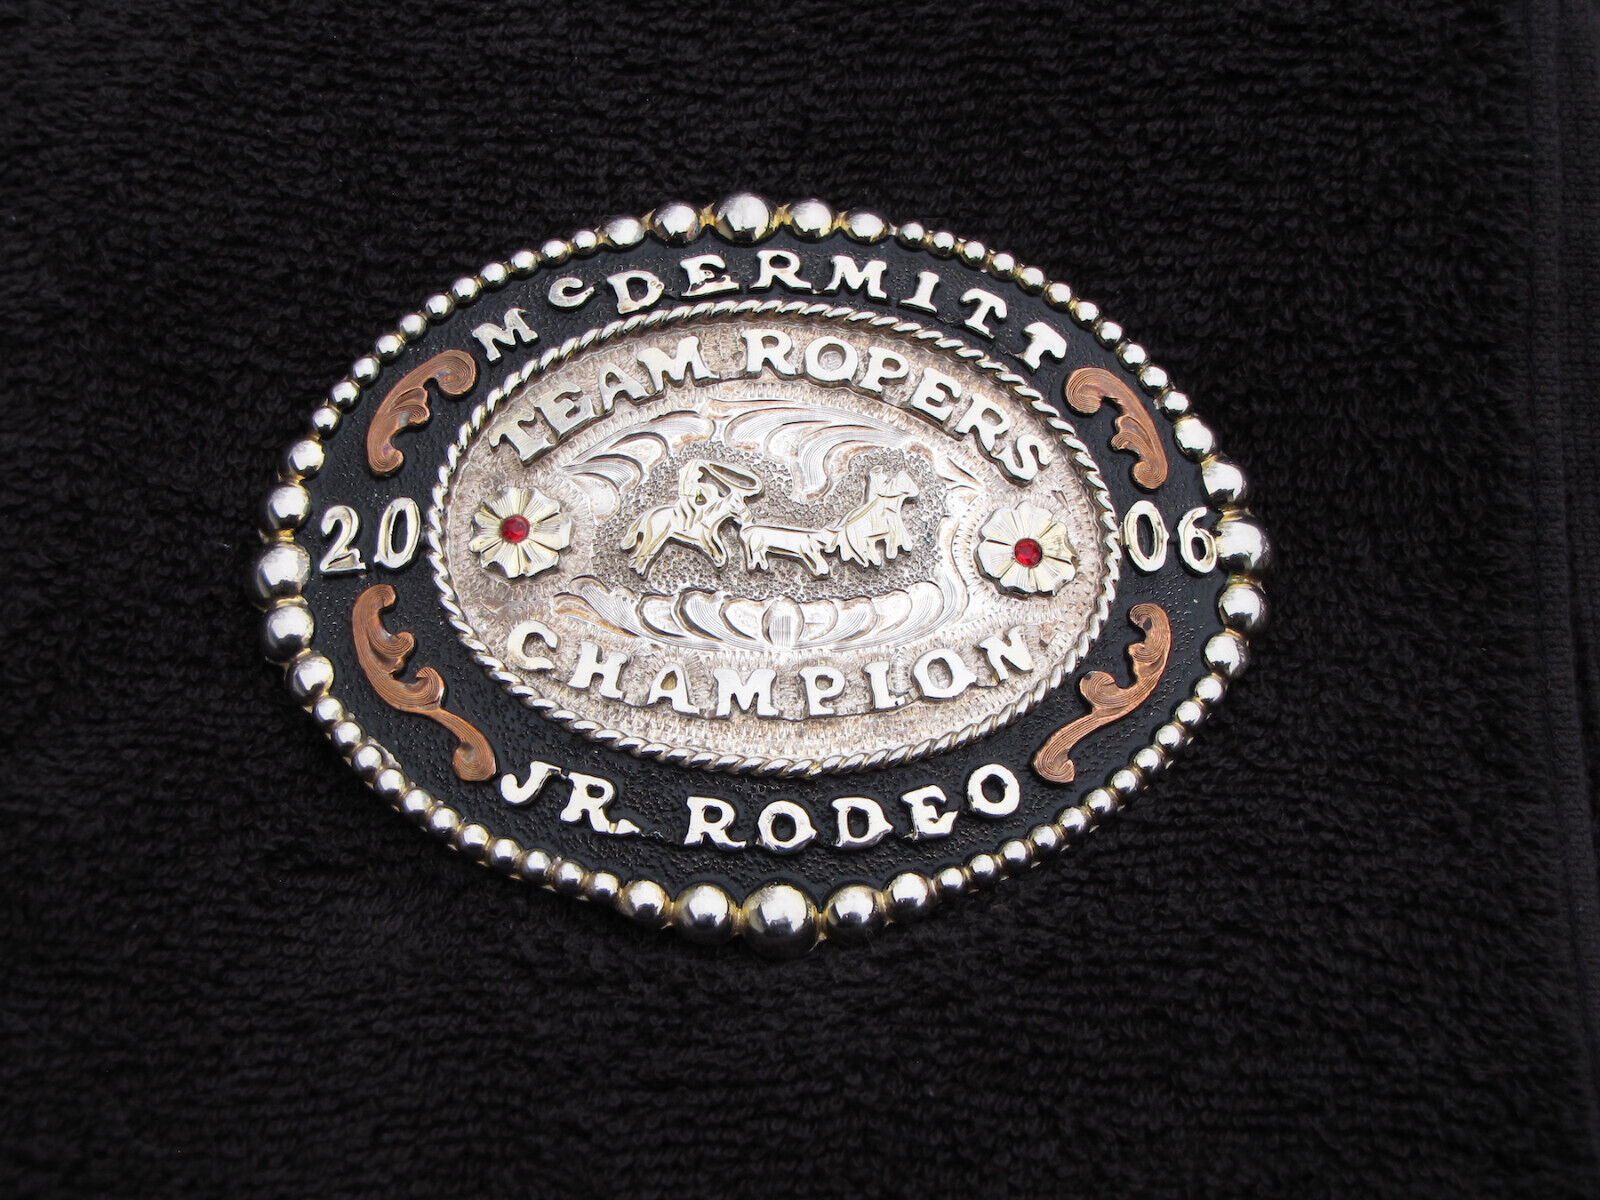 Authentic Rodeo Cowboy Trophy Champion Belt Buckle Team Roping 2006 McDermitt